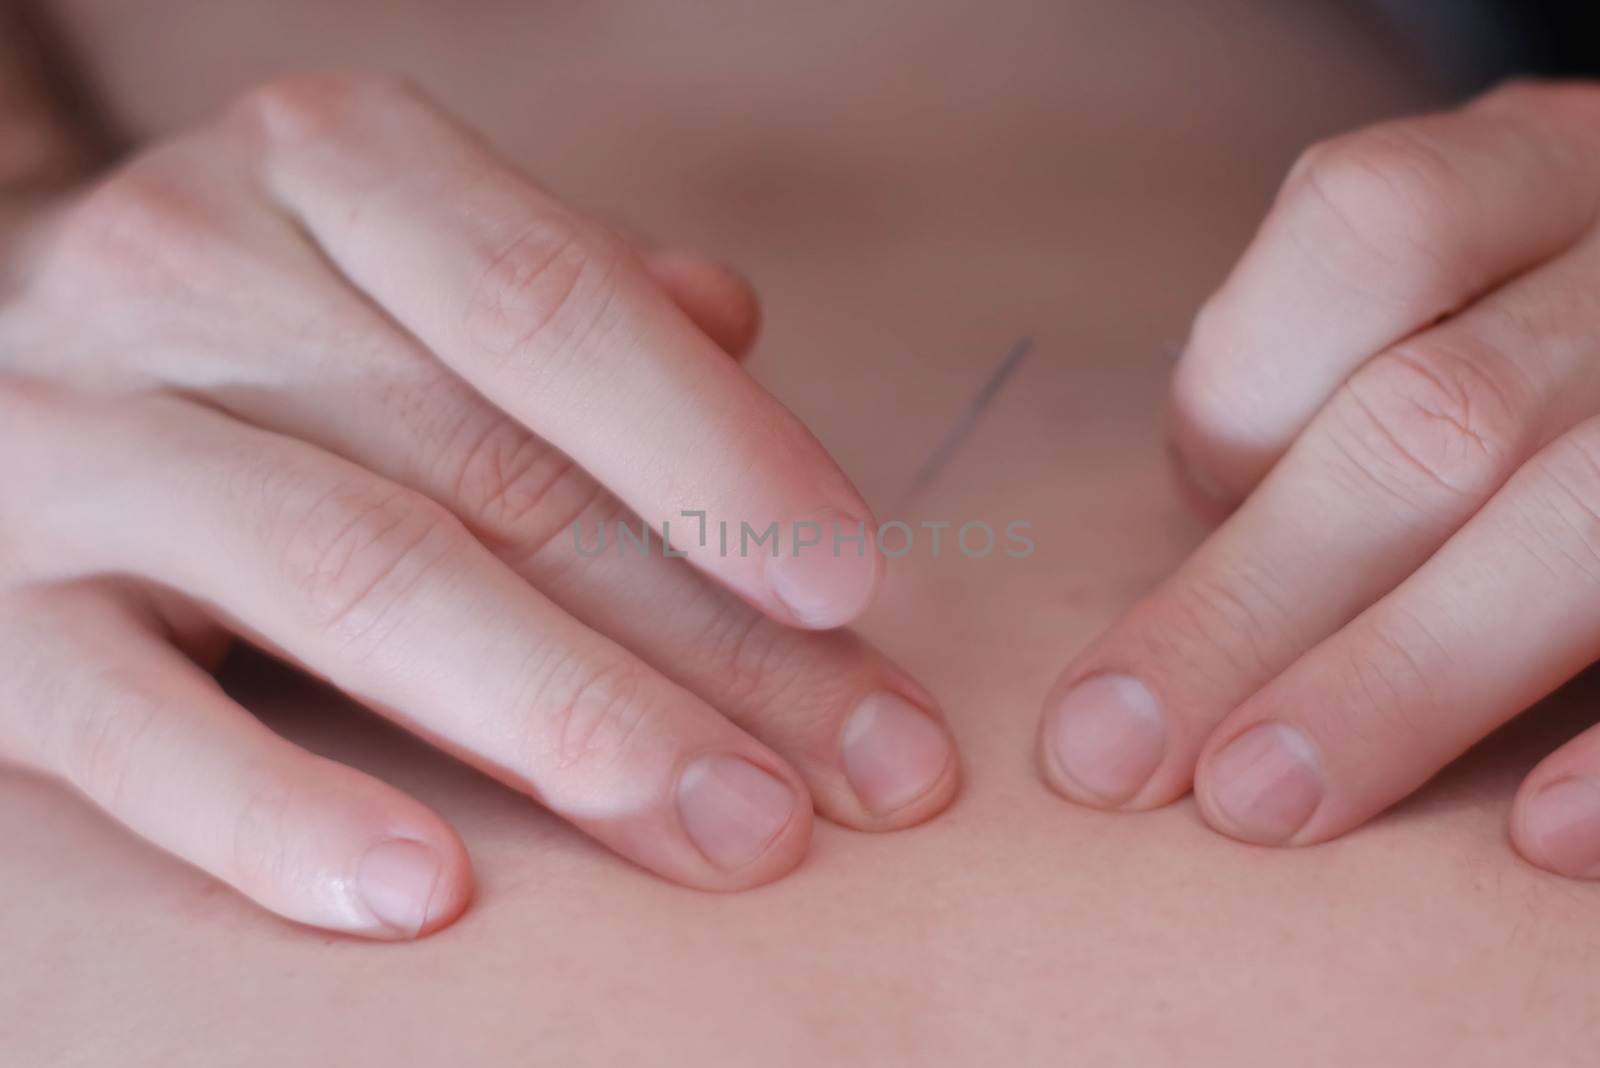 Acupuncture, is used to relieve pain or for medicinal purposes. The benefits of acupuncture. Body care , stimulating an acupuncture needle on the back of a patient. by nkooume